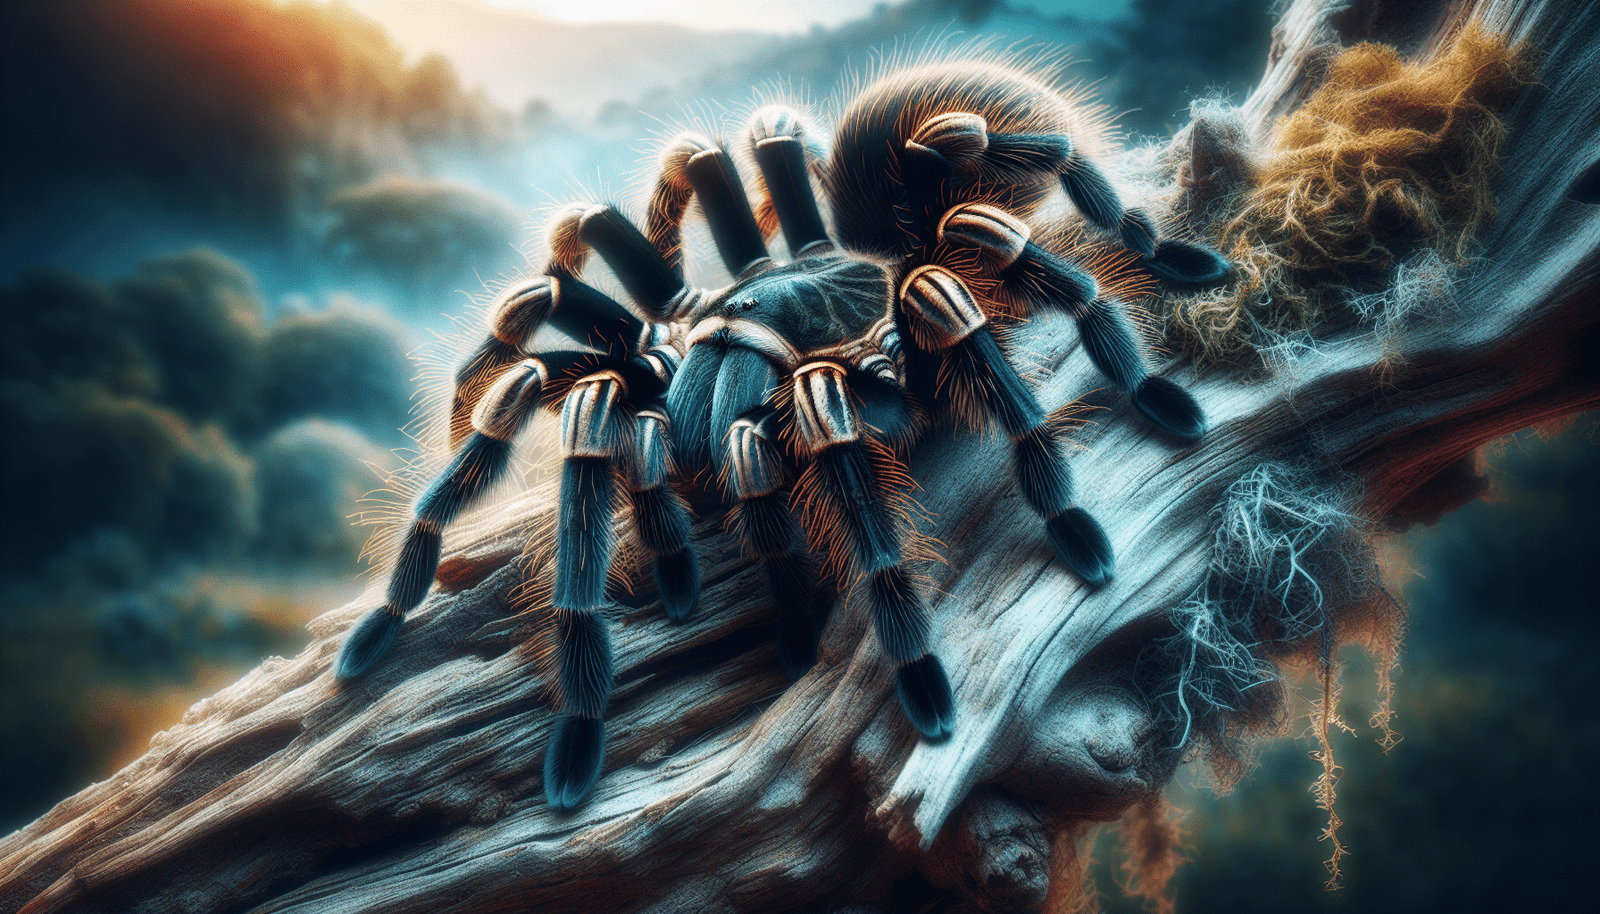 Can Tarantulas Be Affected By Threats From Large Predatory Crustaceans?